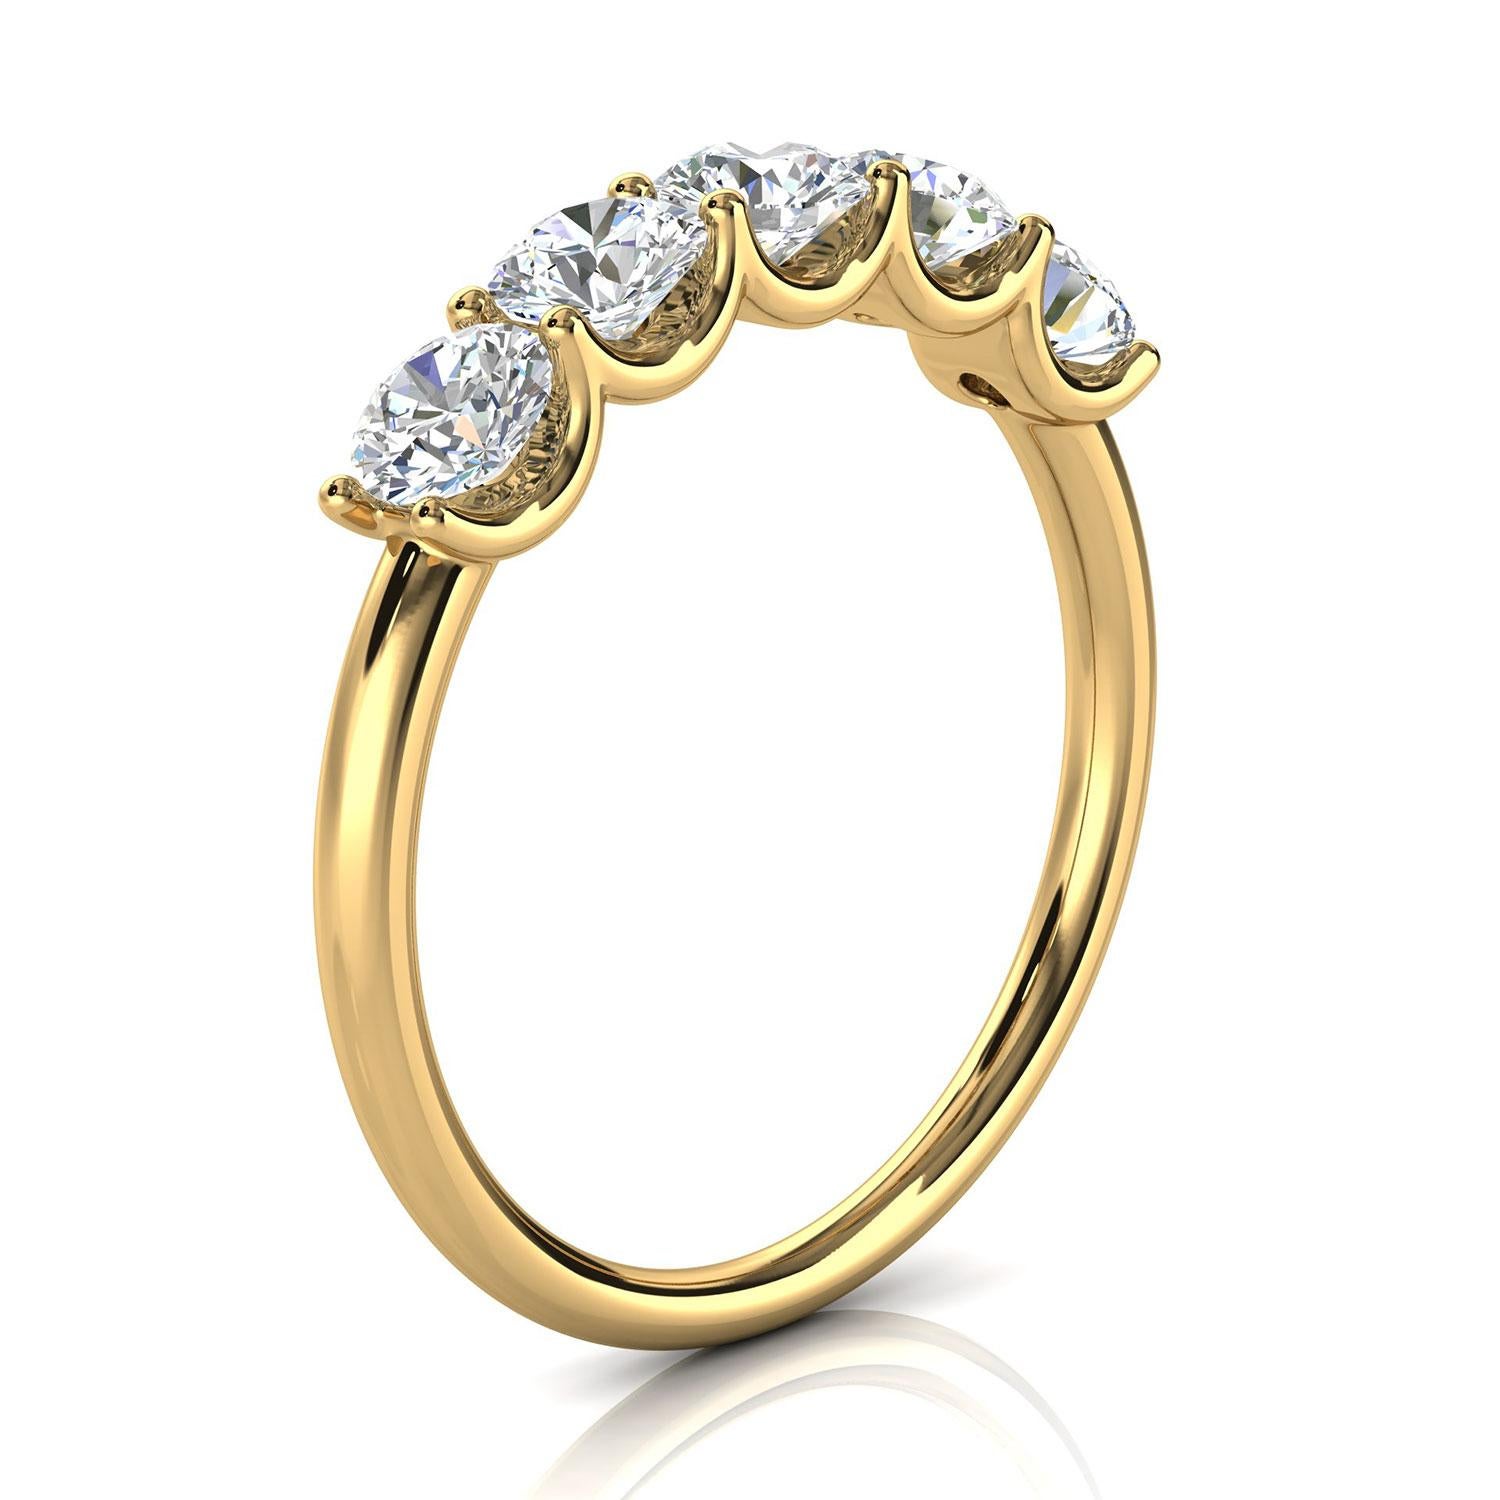 This ring features five(5) floating Brilliante round diamonds set in 